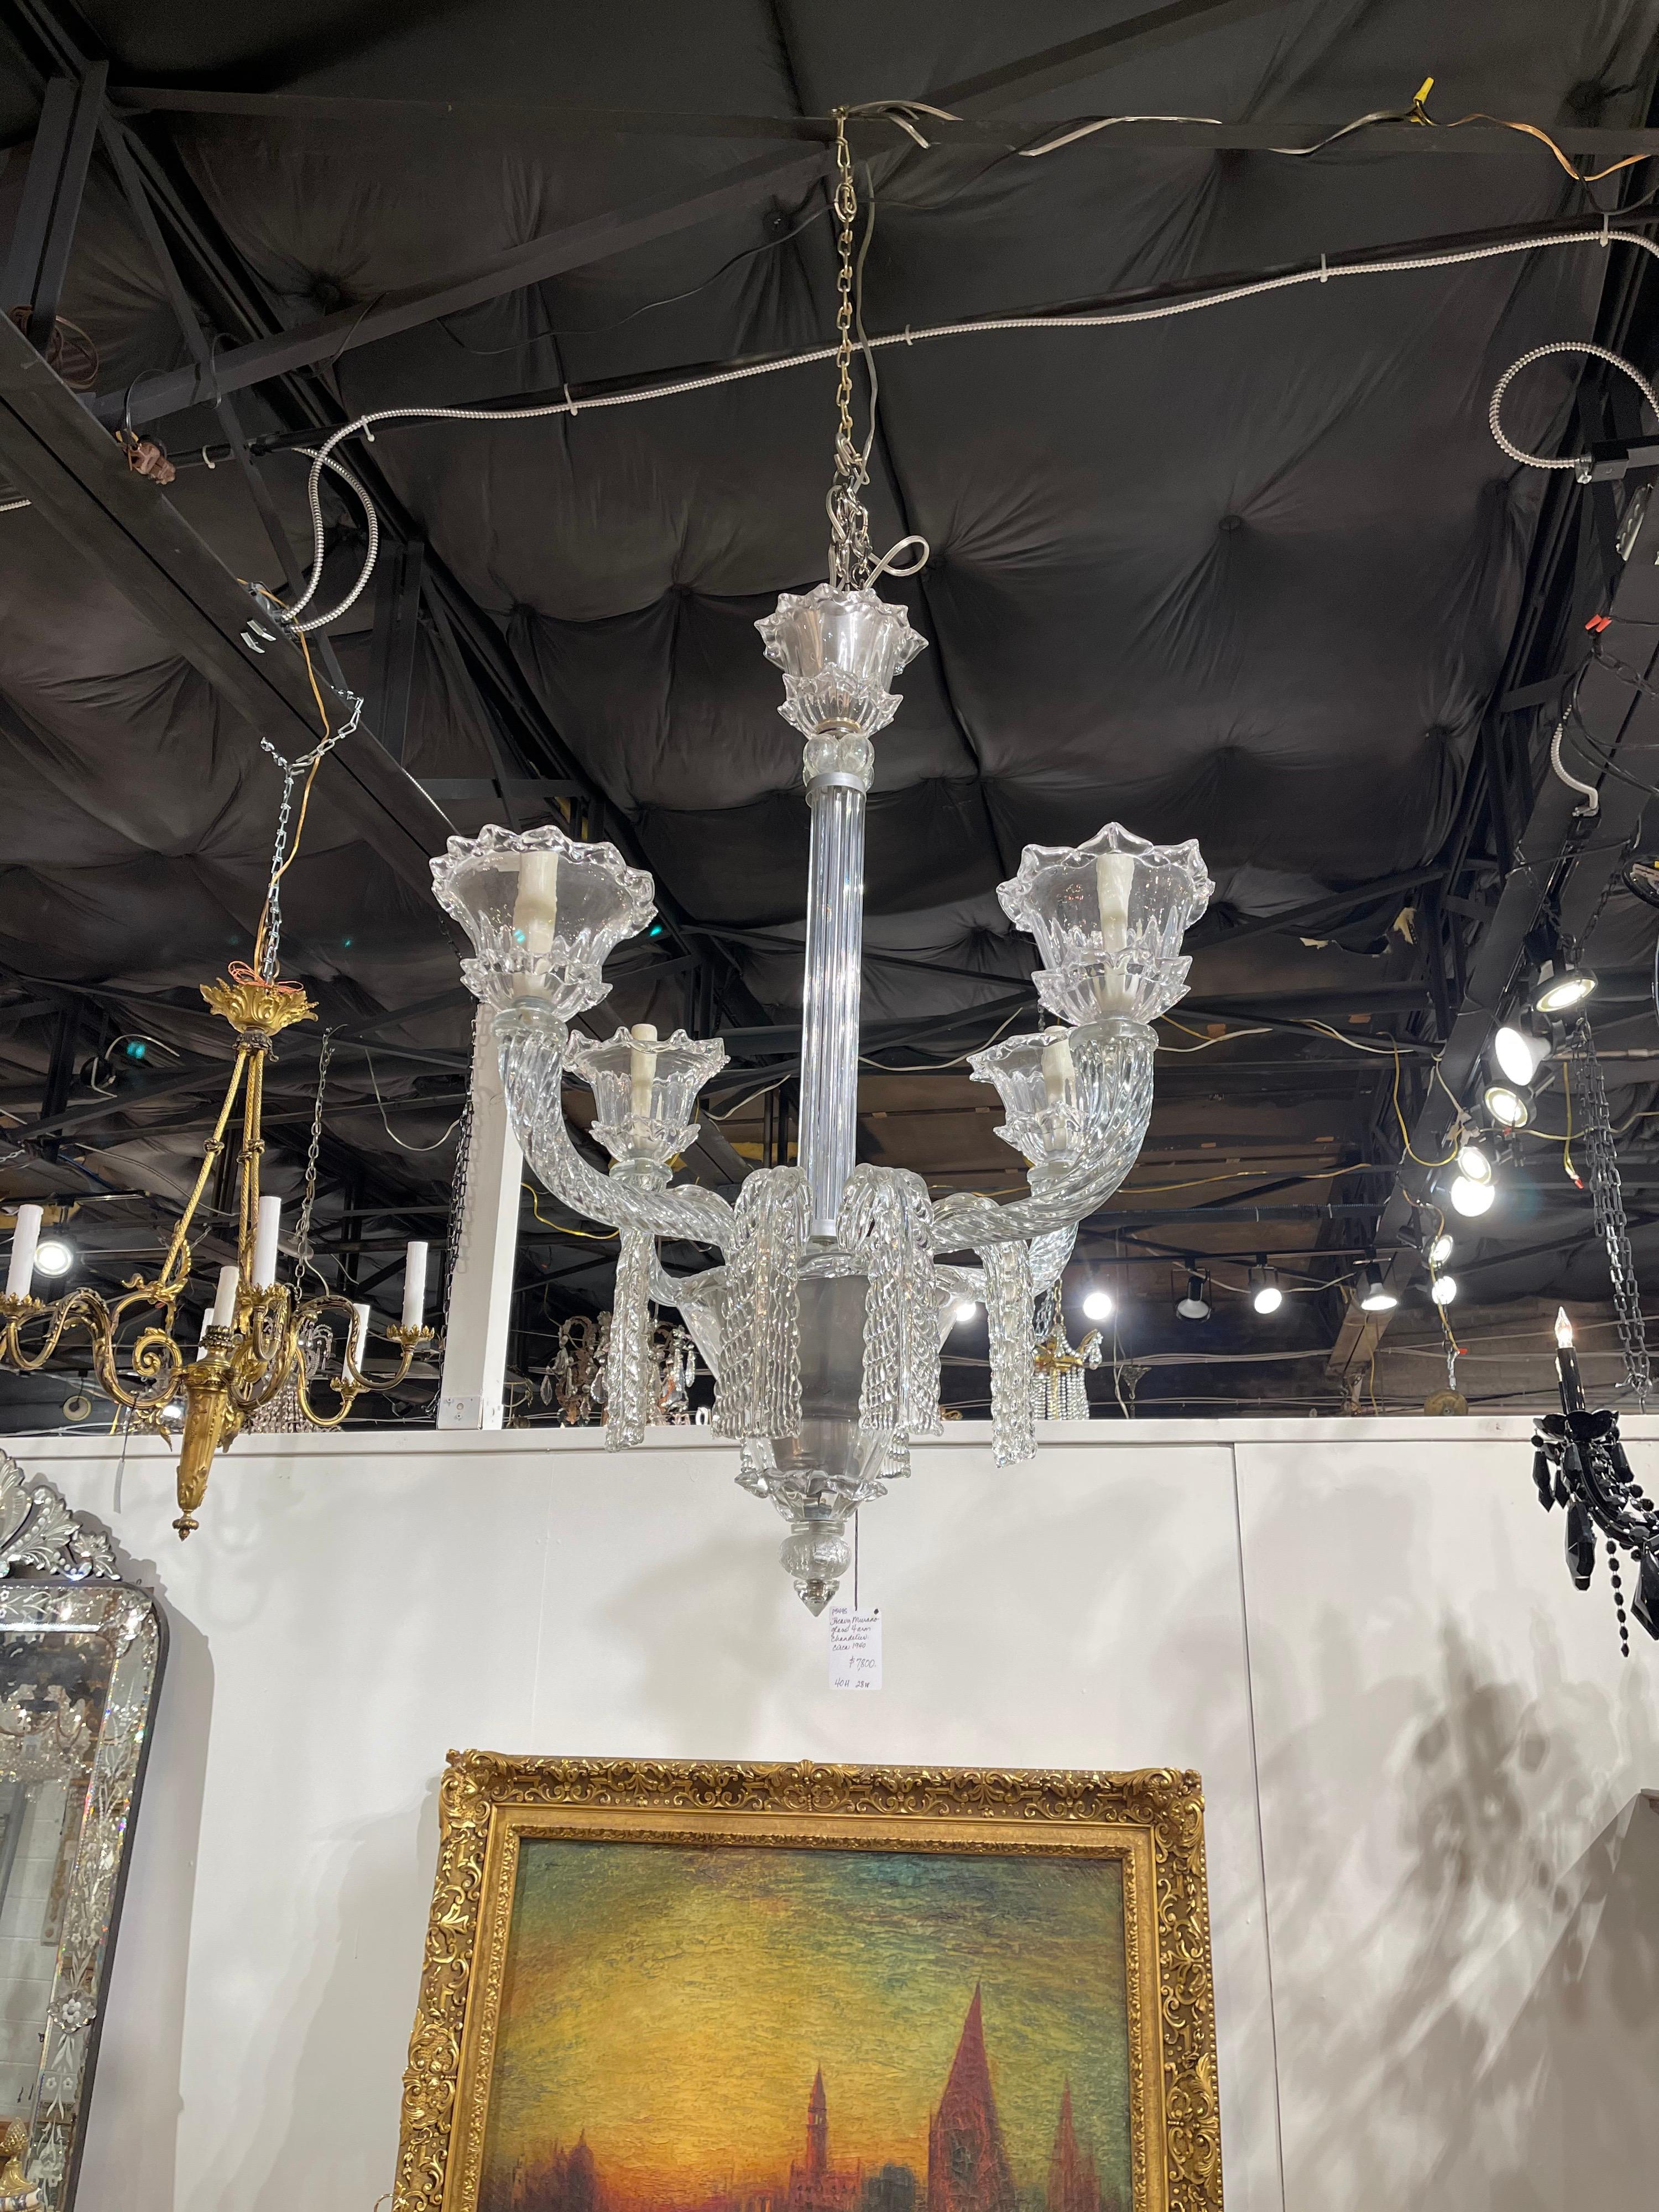 Superb French heavy cut glass chandelier with a star-point glass and chromium crown atop a swirl patterned cut glass stem. The chromium bowl-shaped mid-section mounted with cut glass drapes and four curved arms having cut glass candle cups. Accented